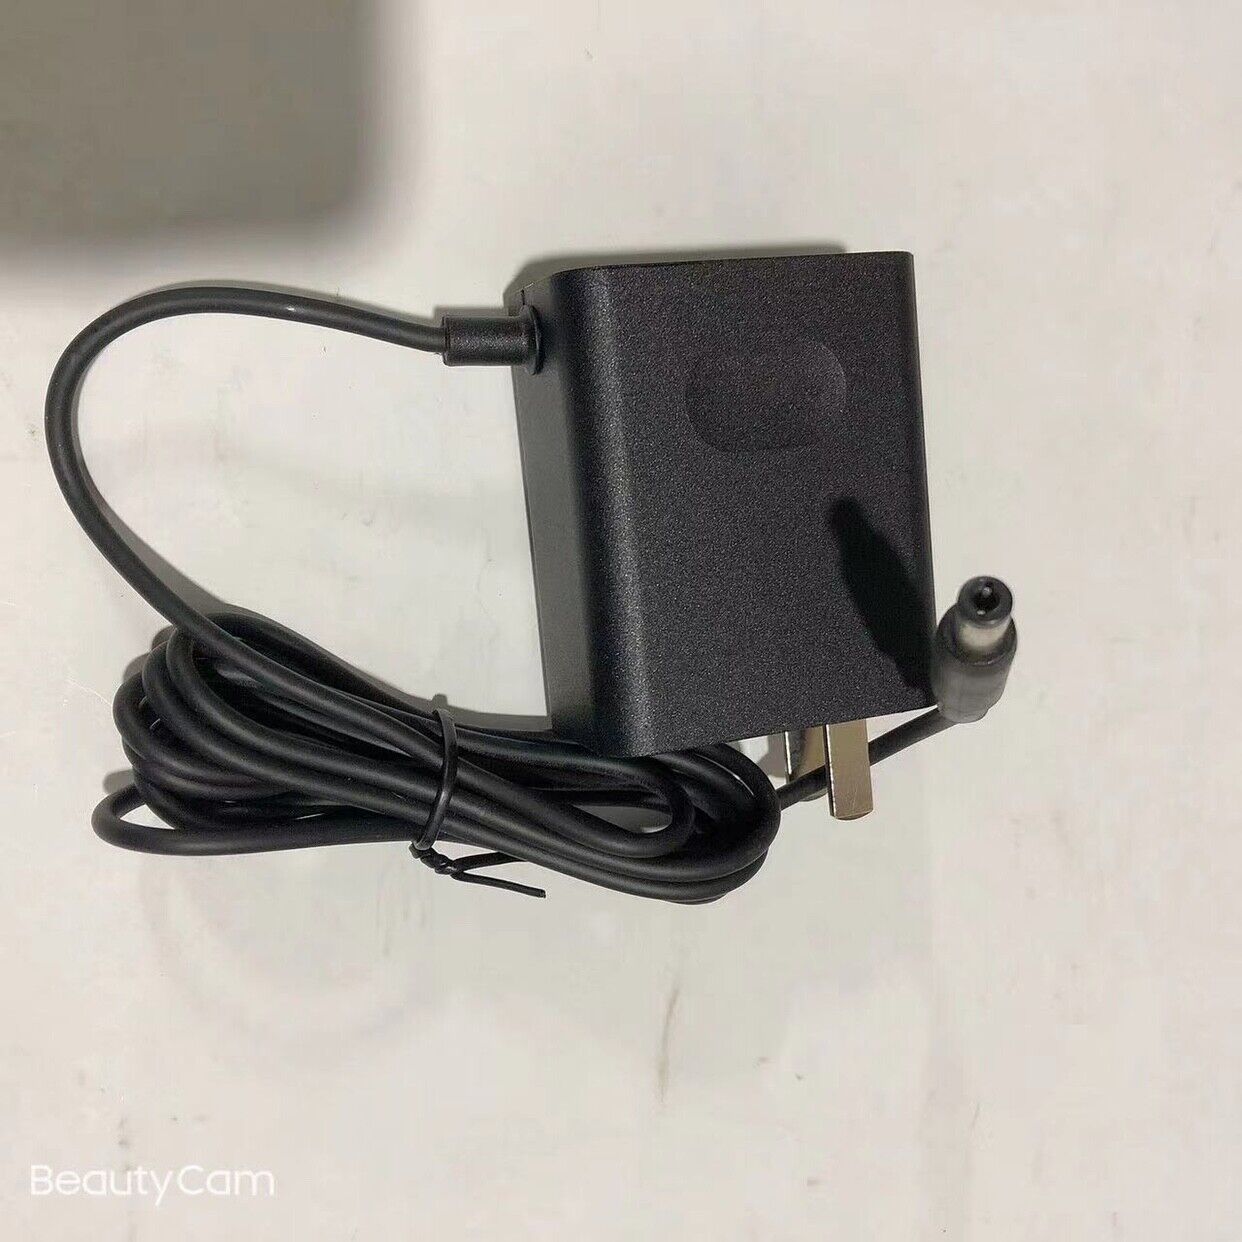 Genuine HUAWEI AC Adapter HW-120200C02 Power Supply 12V 2A US Charger Plug